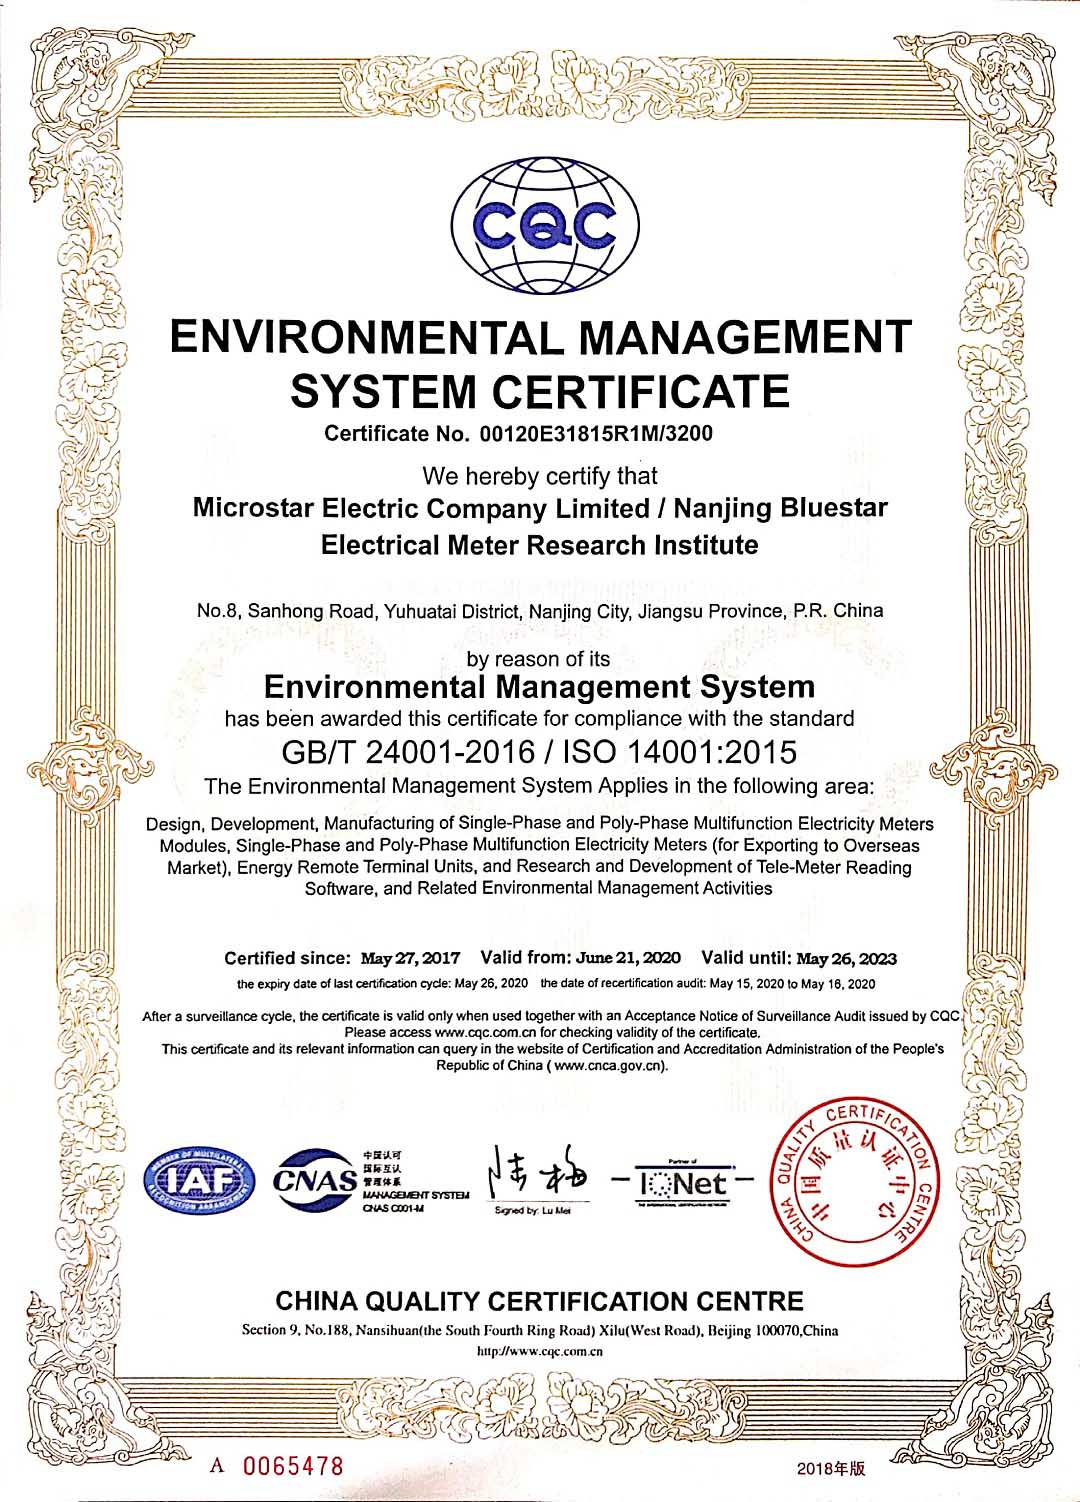 Microstar ISO-14001:2015 Environment Management System Certificate